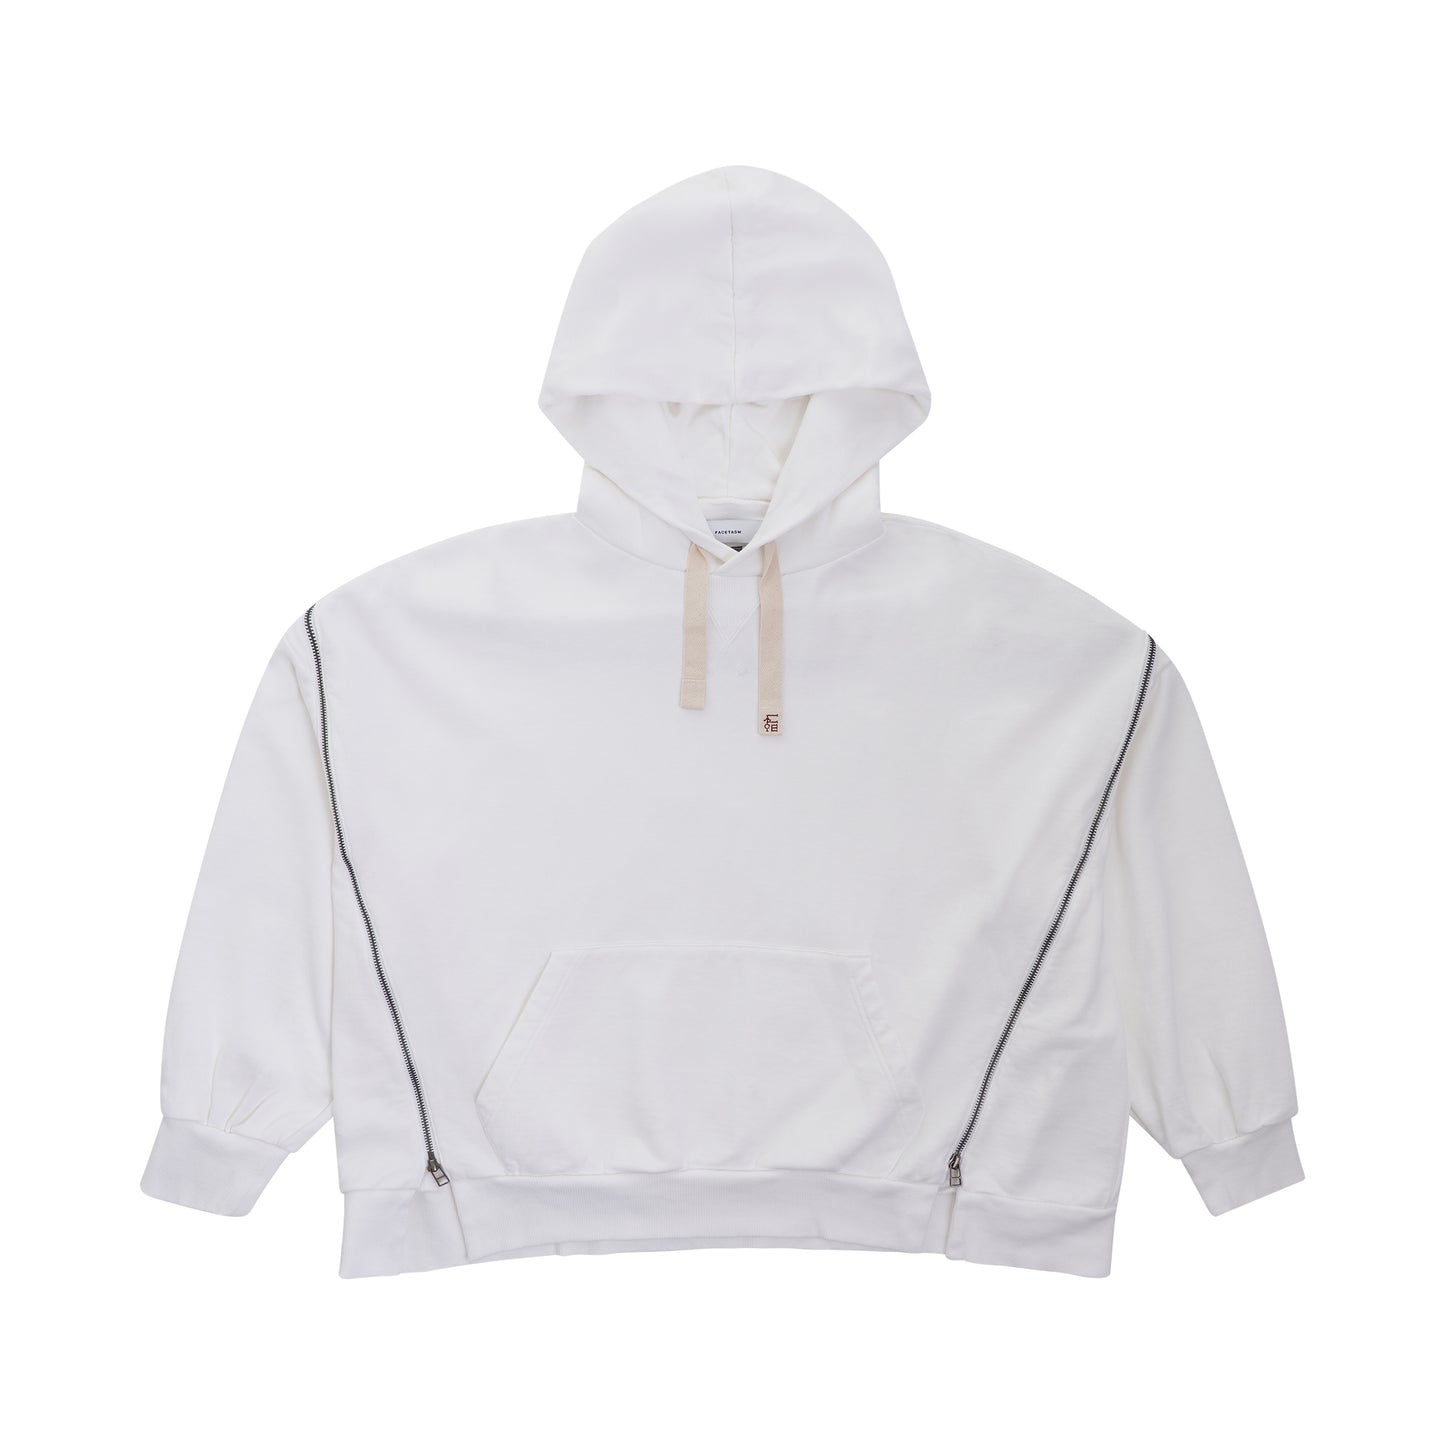 Embroidered Drawstring Zip Hoodie in White